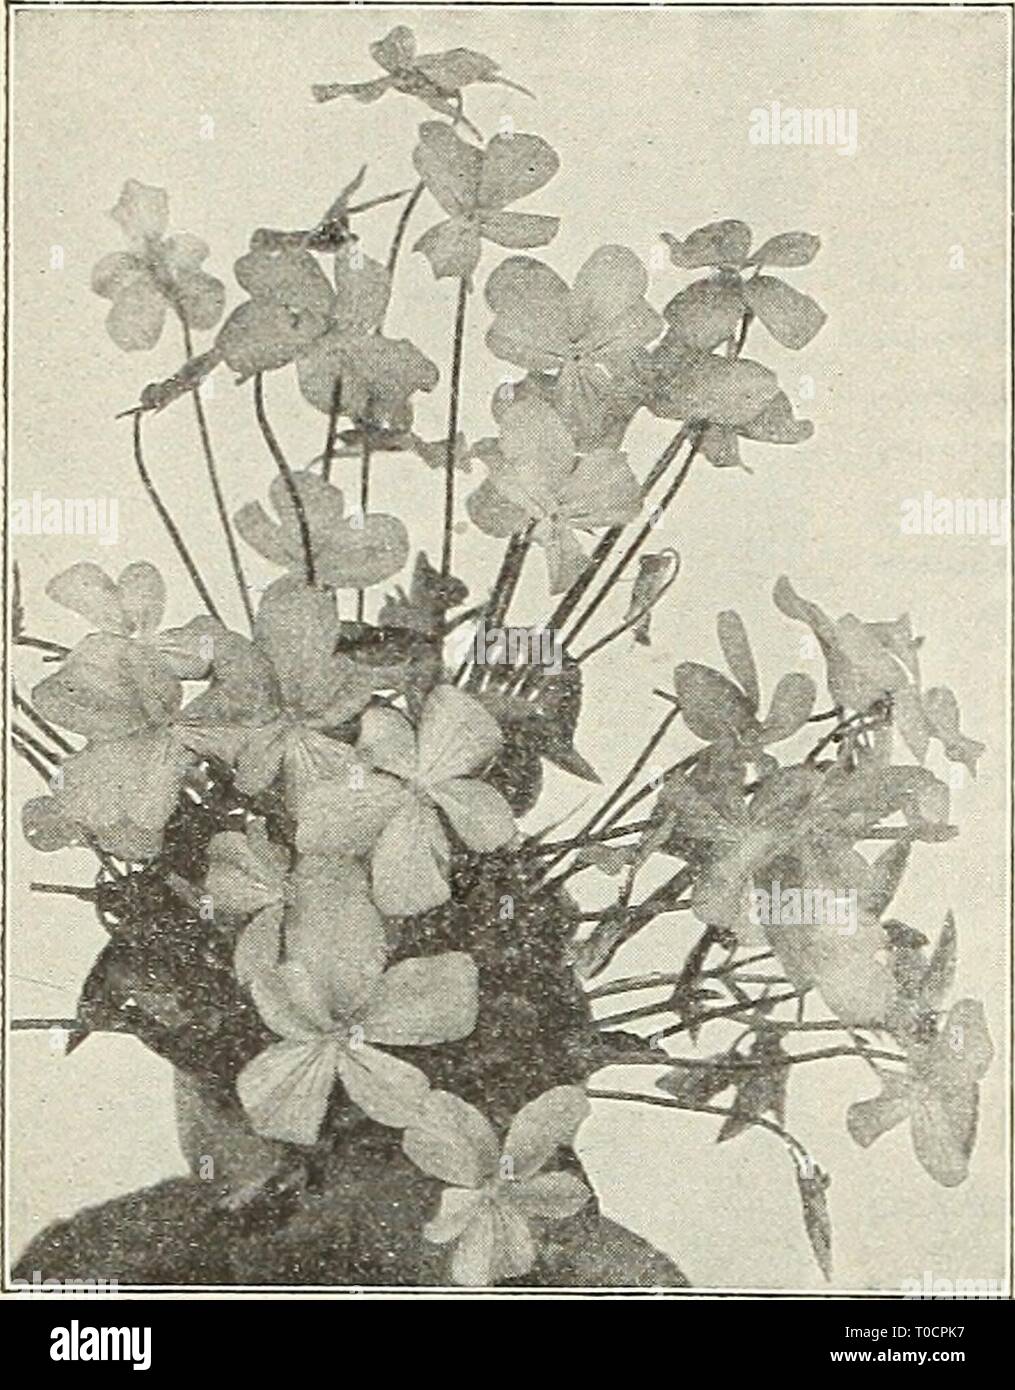 Dreer's garden book 1916 (1916) Dreer's garden book 1916 dreersgardenbook1916henr Year: 1916  244 nil iHMTADRHR -PHILADELPHIAt|»pw PEREMMIAL PLANTS    Viola Corkuta Purpurea TIOLA CORNUTA PUR- PUREA, OR, G. WERMIG. A variety of the tufted Pans}7, forming clumps that are a sheet of bloom the entire season, and a most attractive subject for the border; the flowers, which in general appearance closely resembles the Princess of Wales Violet, make it a splendid substitute for the latter during the summer months when these are not to be had. (See cut). 15 cts. each; §1.50 per doz.; per 100. HARDY VI Stock Photo